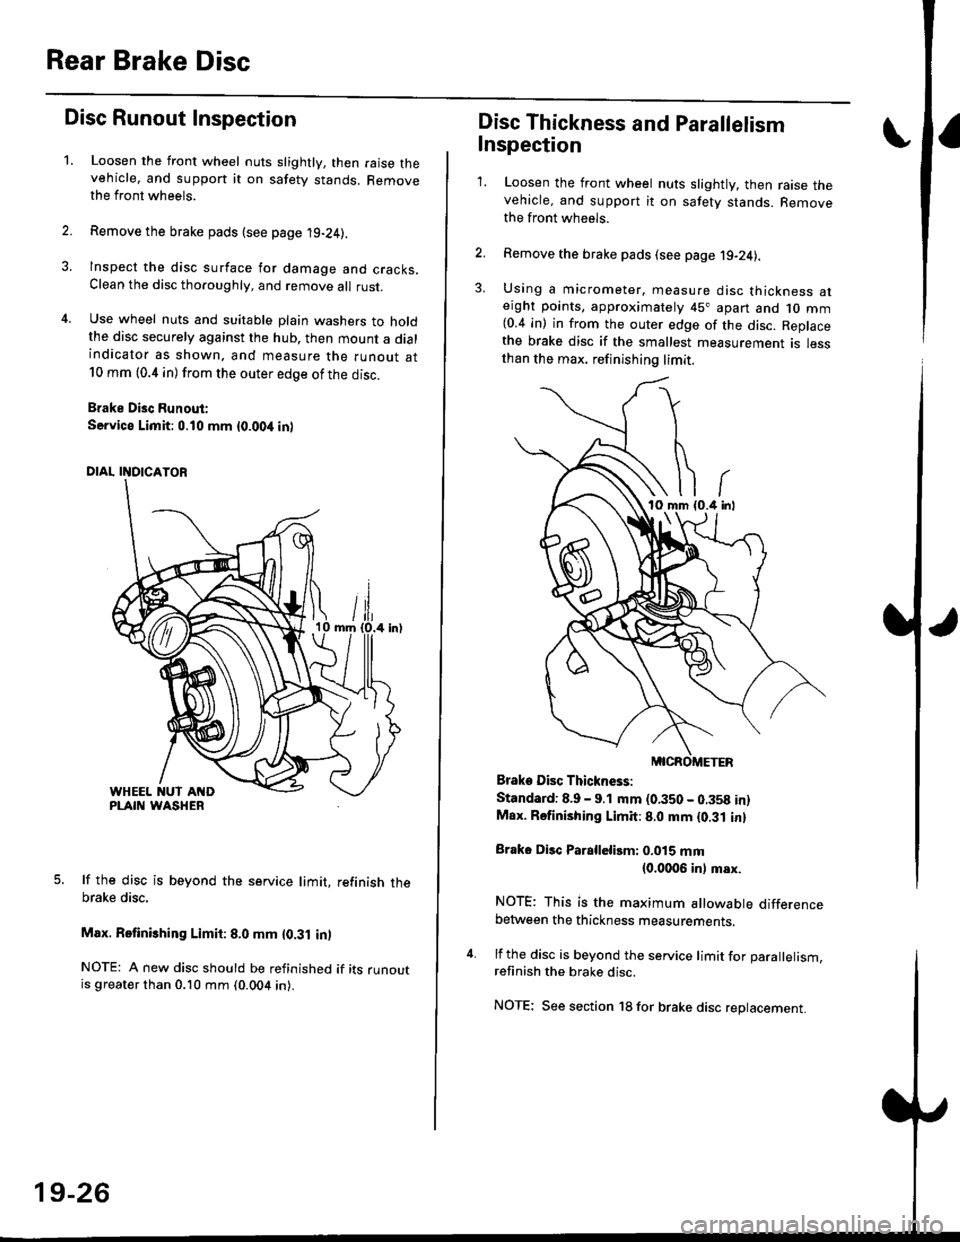 HONDA CIVIC 1999 6.G User Guide Rear Brake Disc
Disc Runout Inspection
1.Loosen the front wheel nuts slightly, then raise thevehicle, and suppon it on safety stands. Removethe front wheels.
Remove the brake pads (see page 19-24).
In